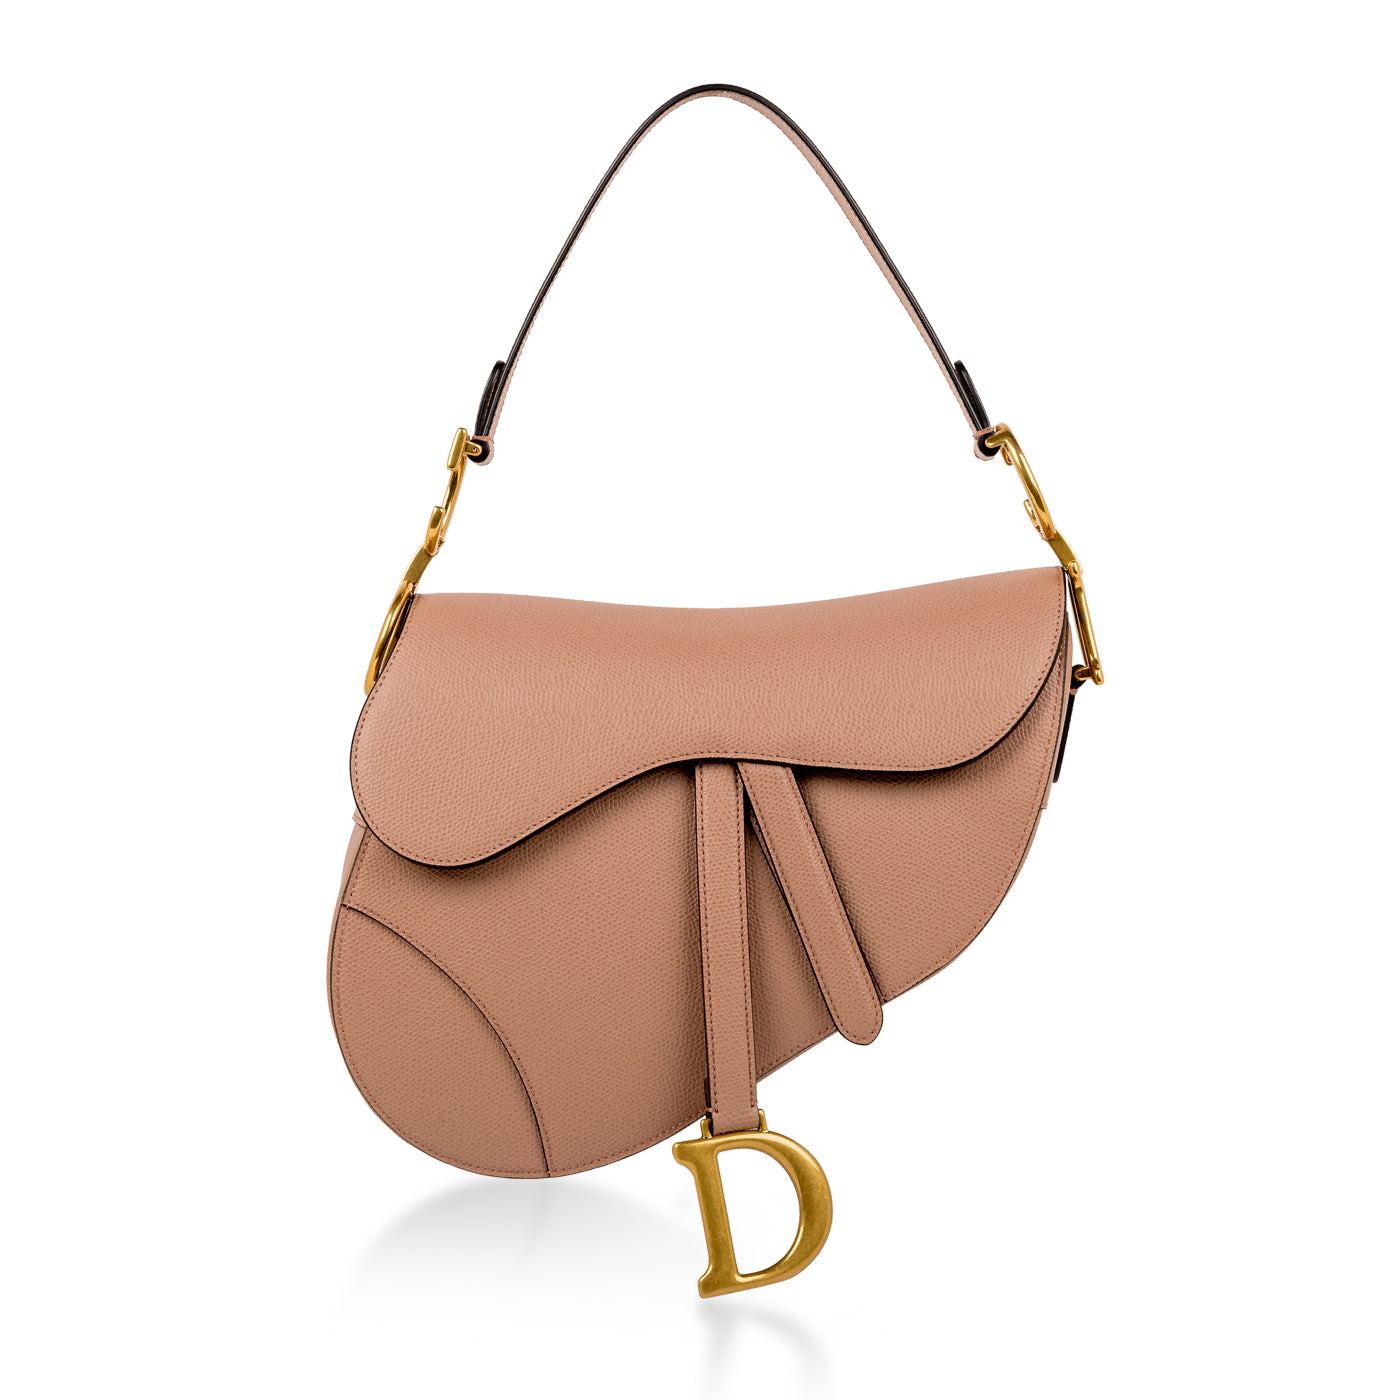 styling dior saddle bag outfit